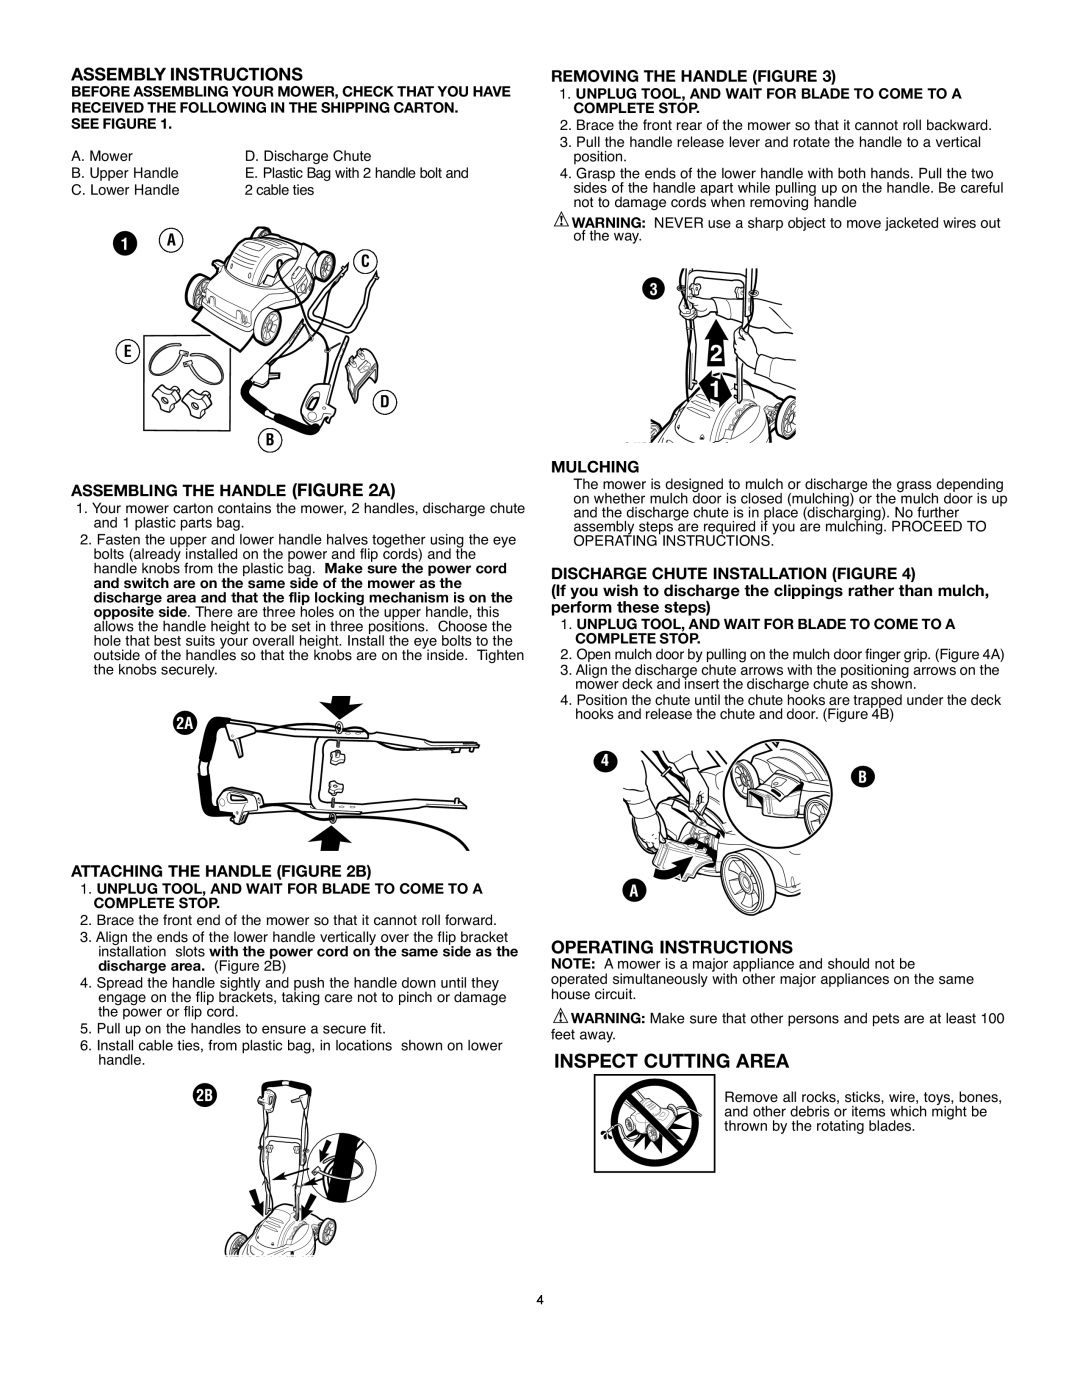 Black & Decker MM675 Inspect Cutting Area, Assembly Instructions, Operating Instructions, E D B, Assembling The Handle A 